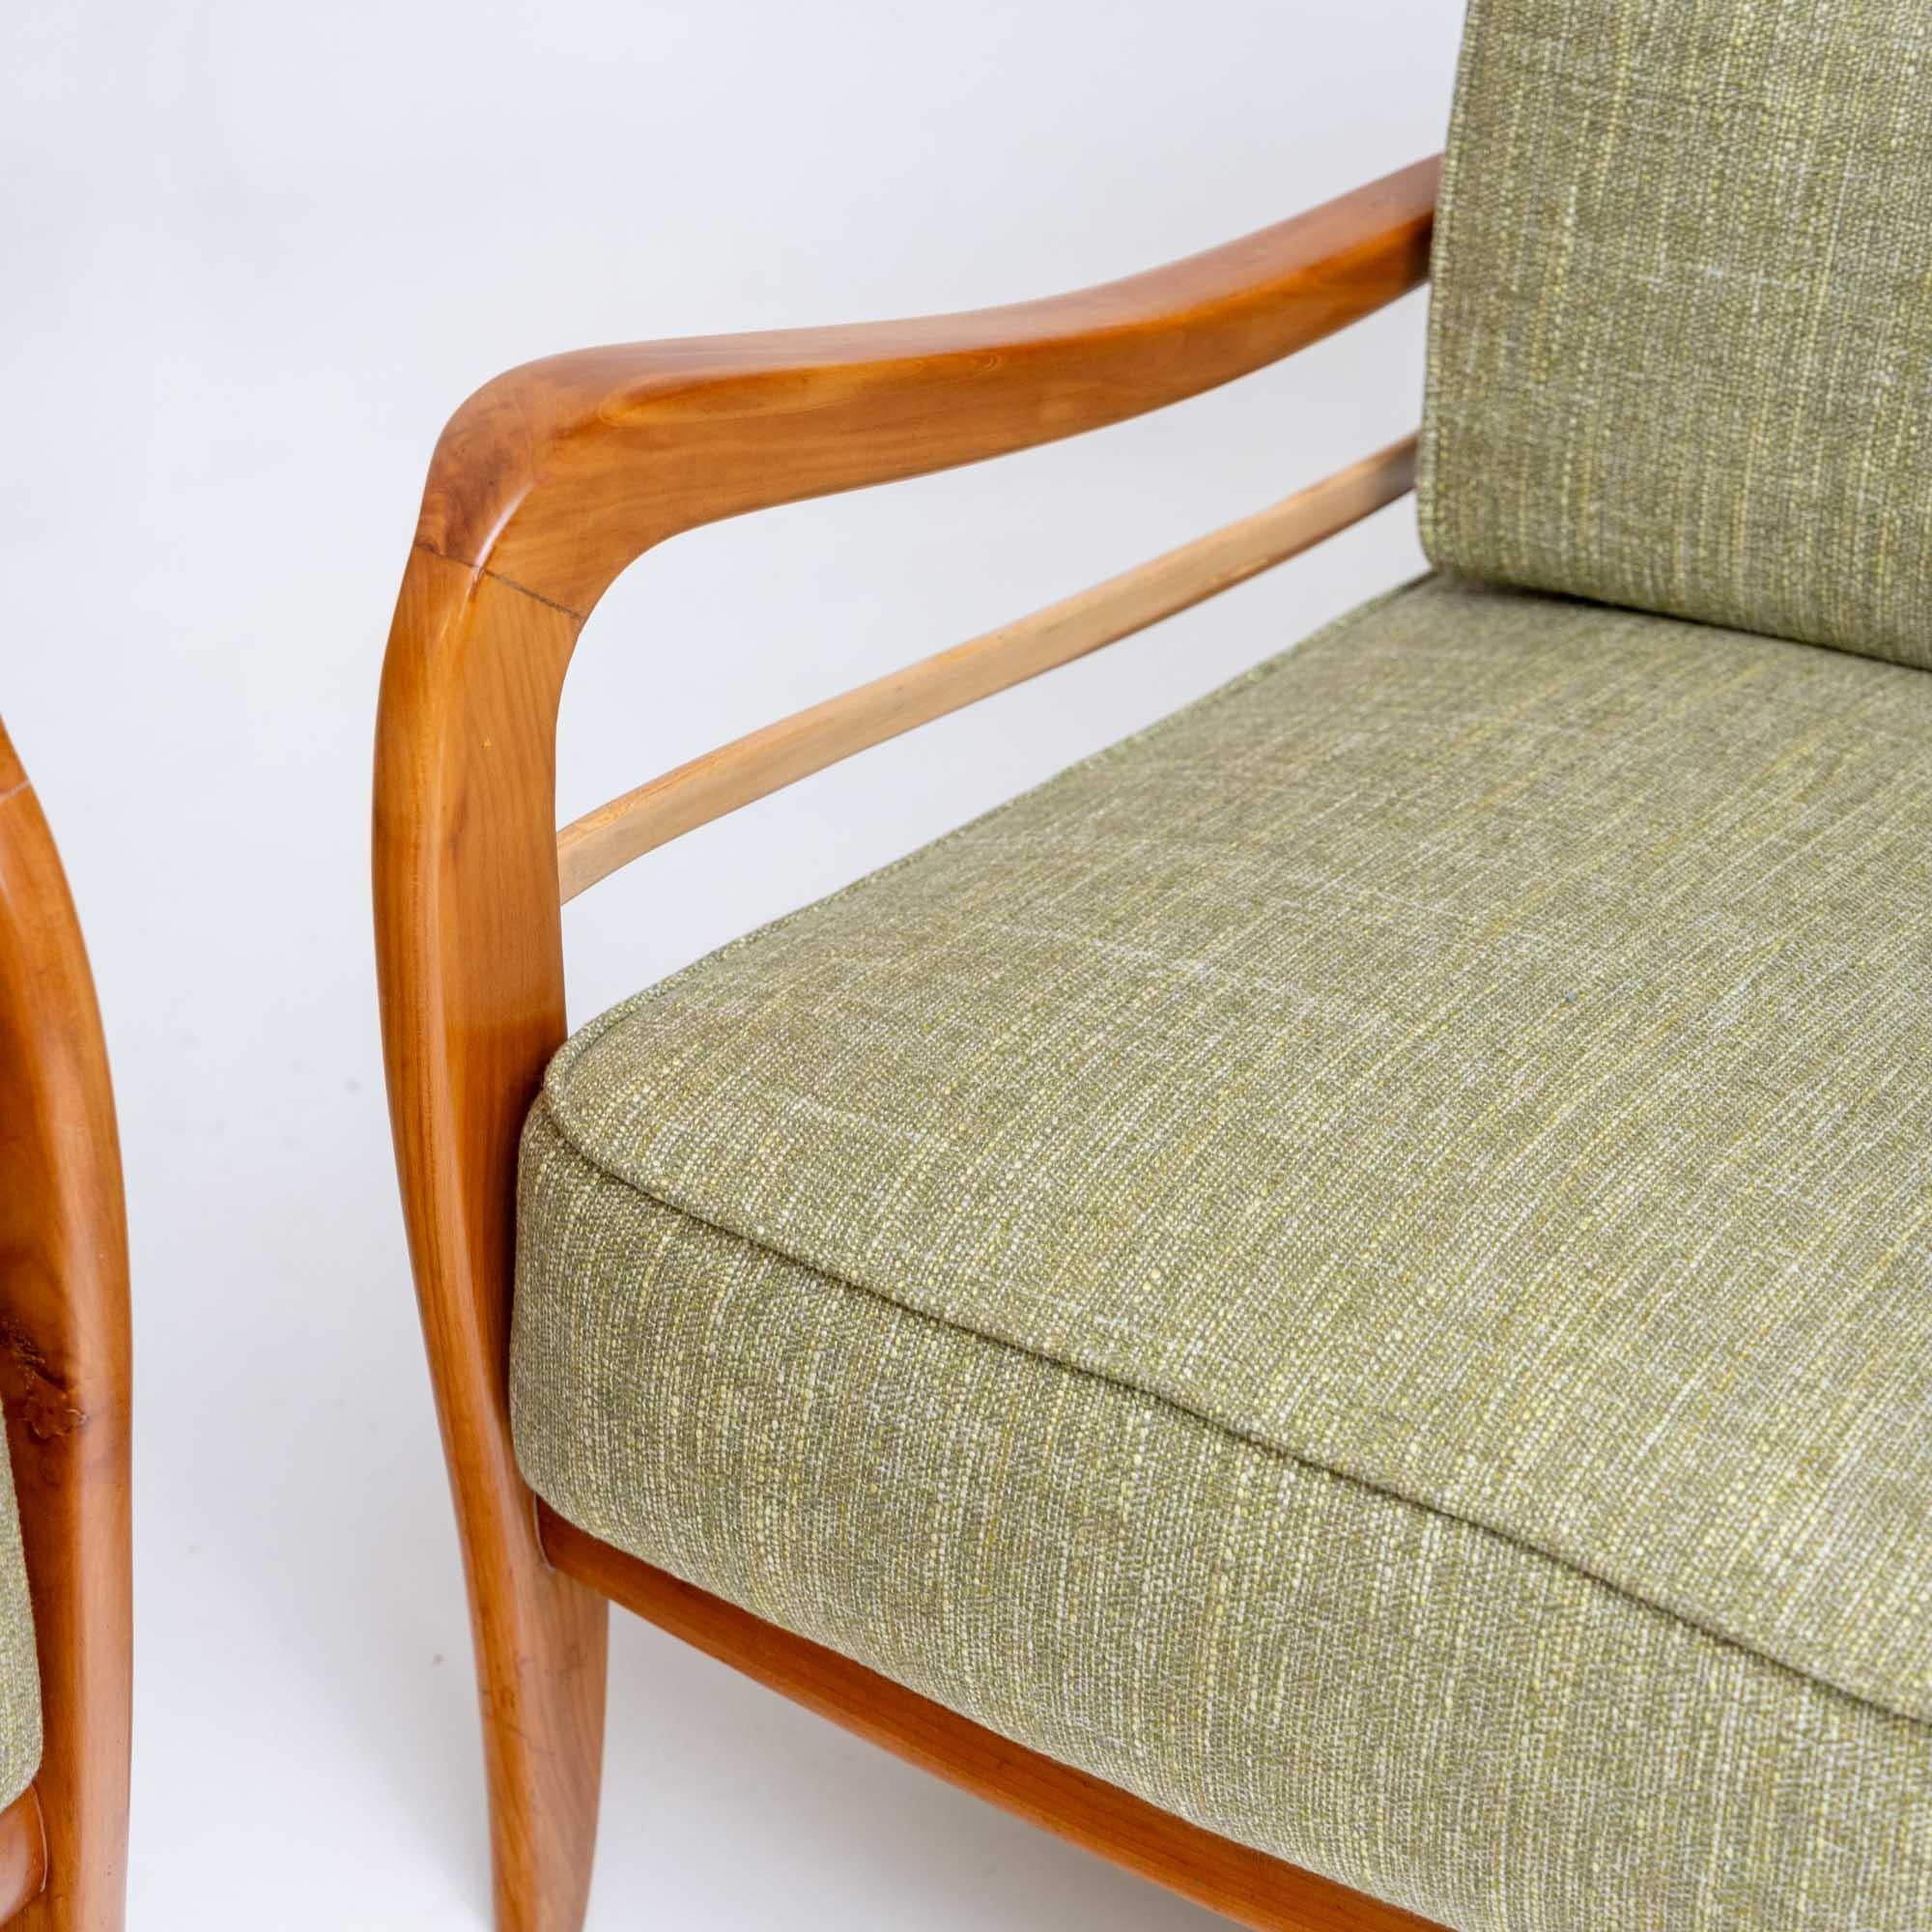 Fabric Pair of Lounge Chairs in Cherry, green Upholstery attr. Paolo Buffa, Italy 1950s For Sale